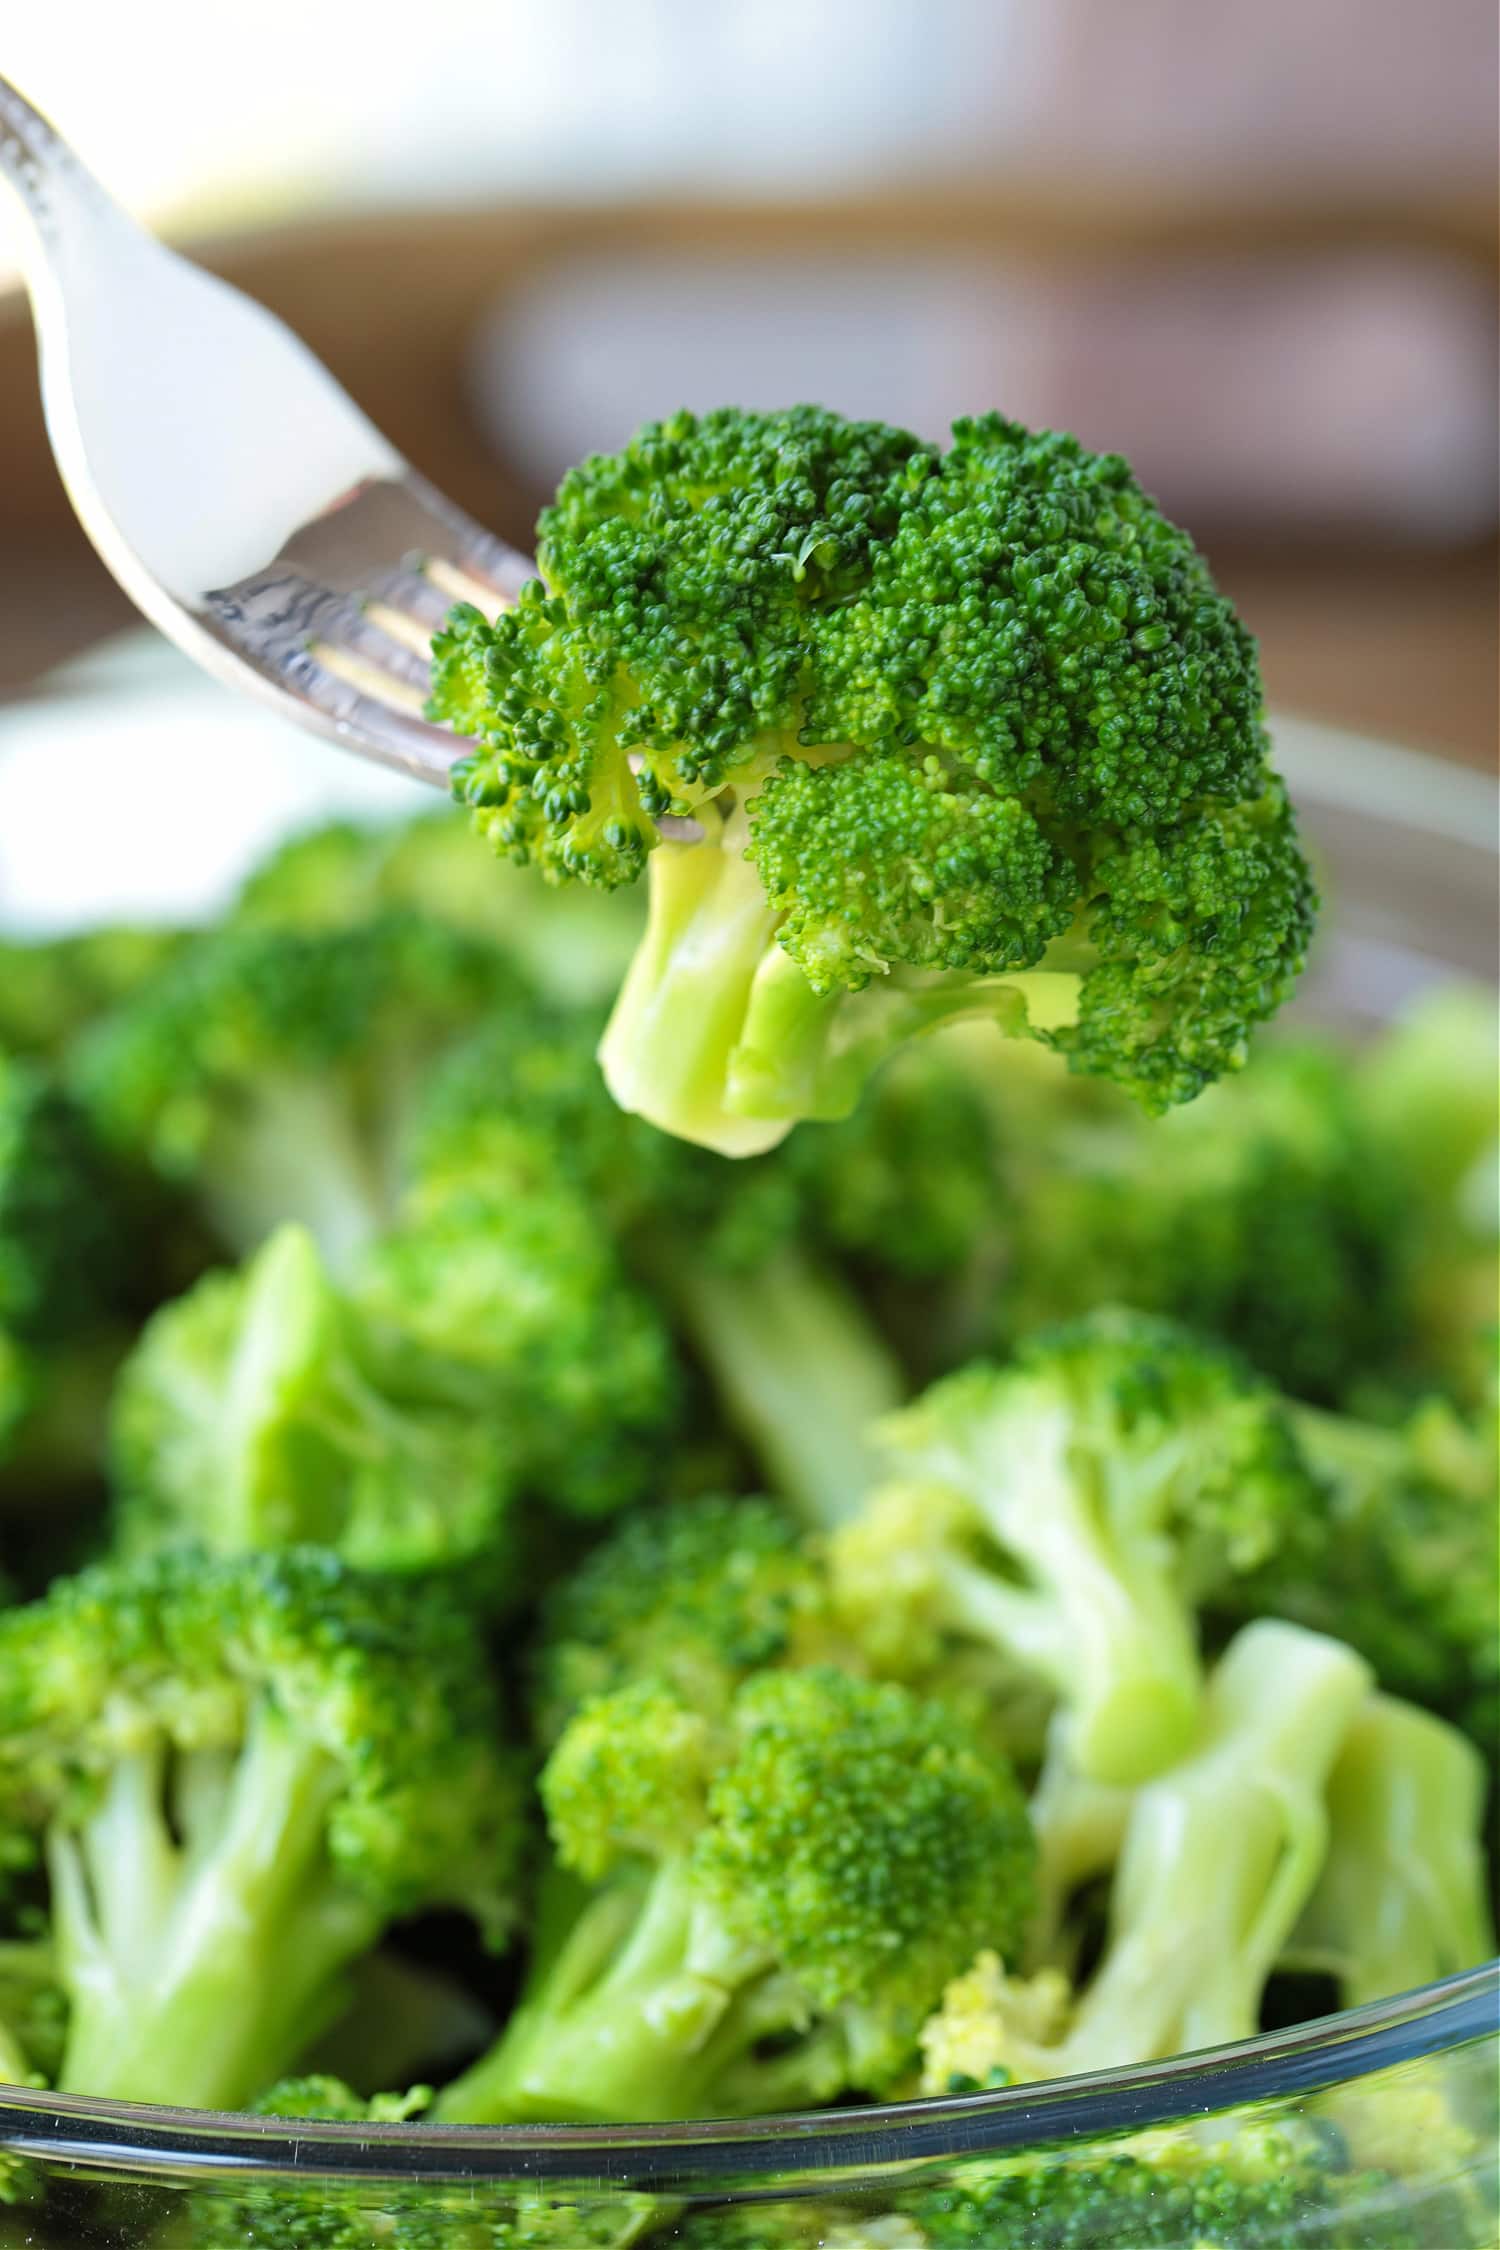 How To Steam Broccoli In The Microwave | Mantitlement